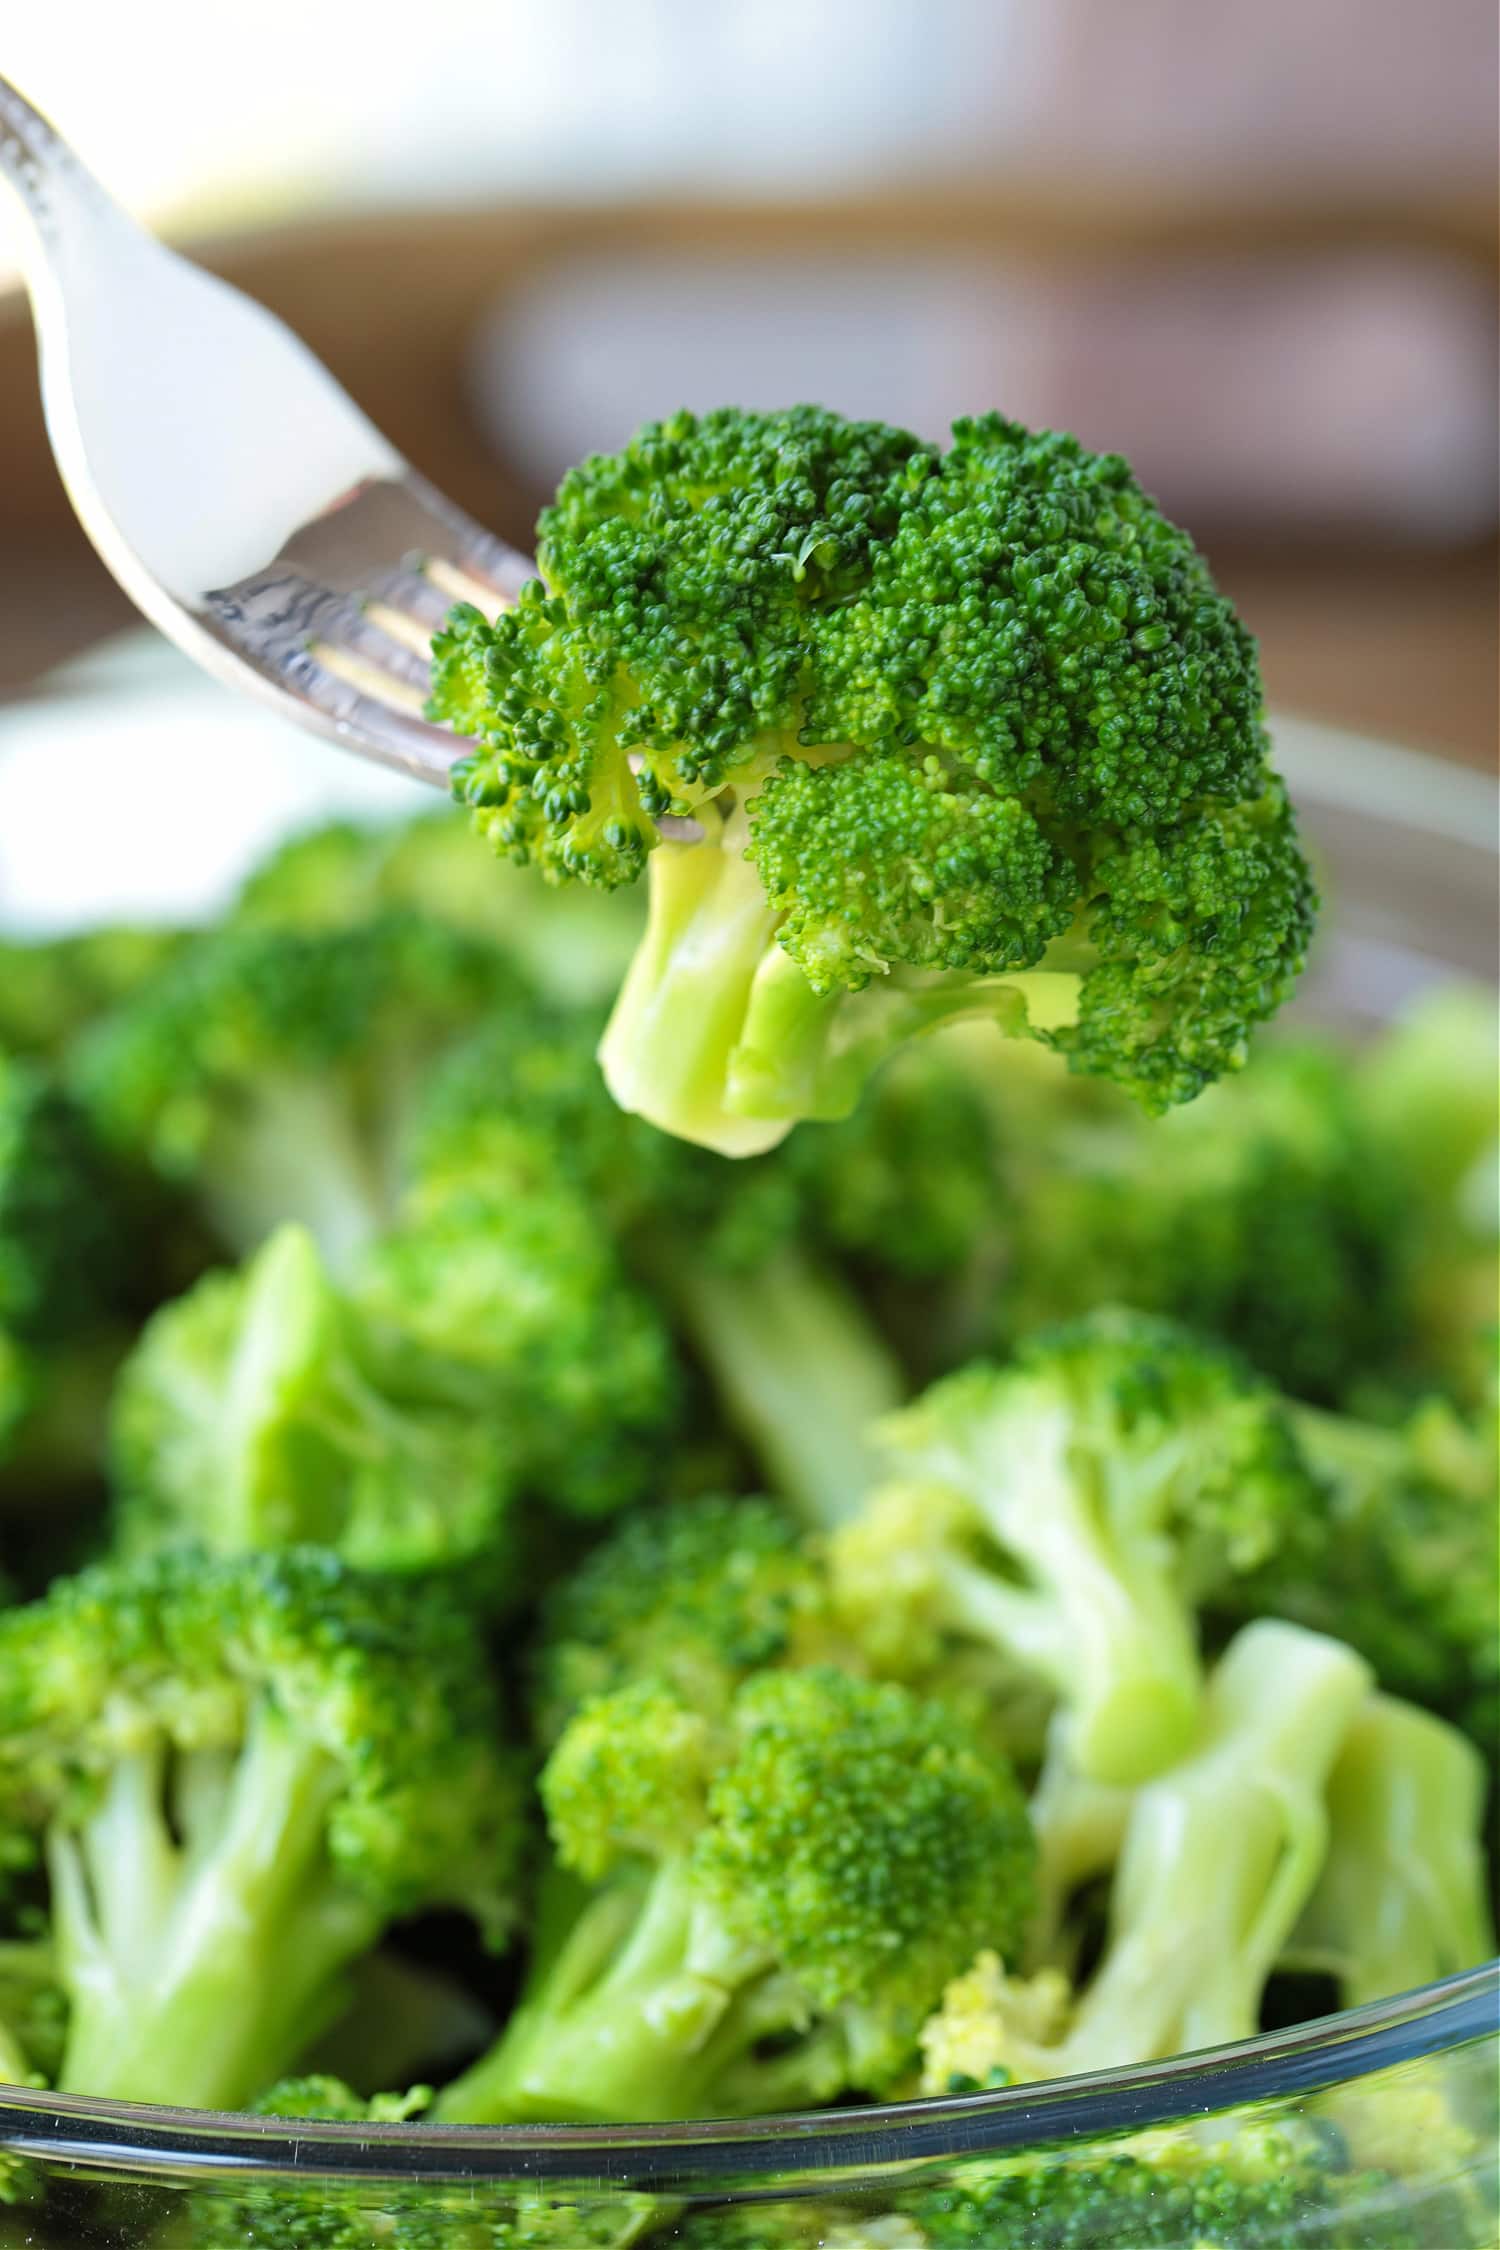 How To Steam Broccoli In The Microwave | Mantitlement